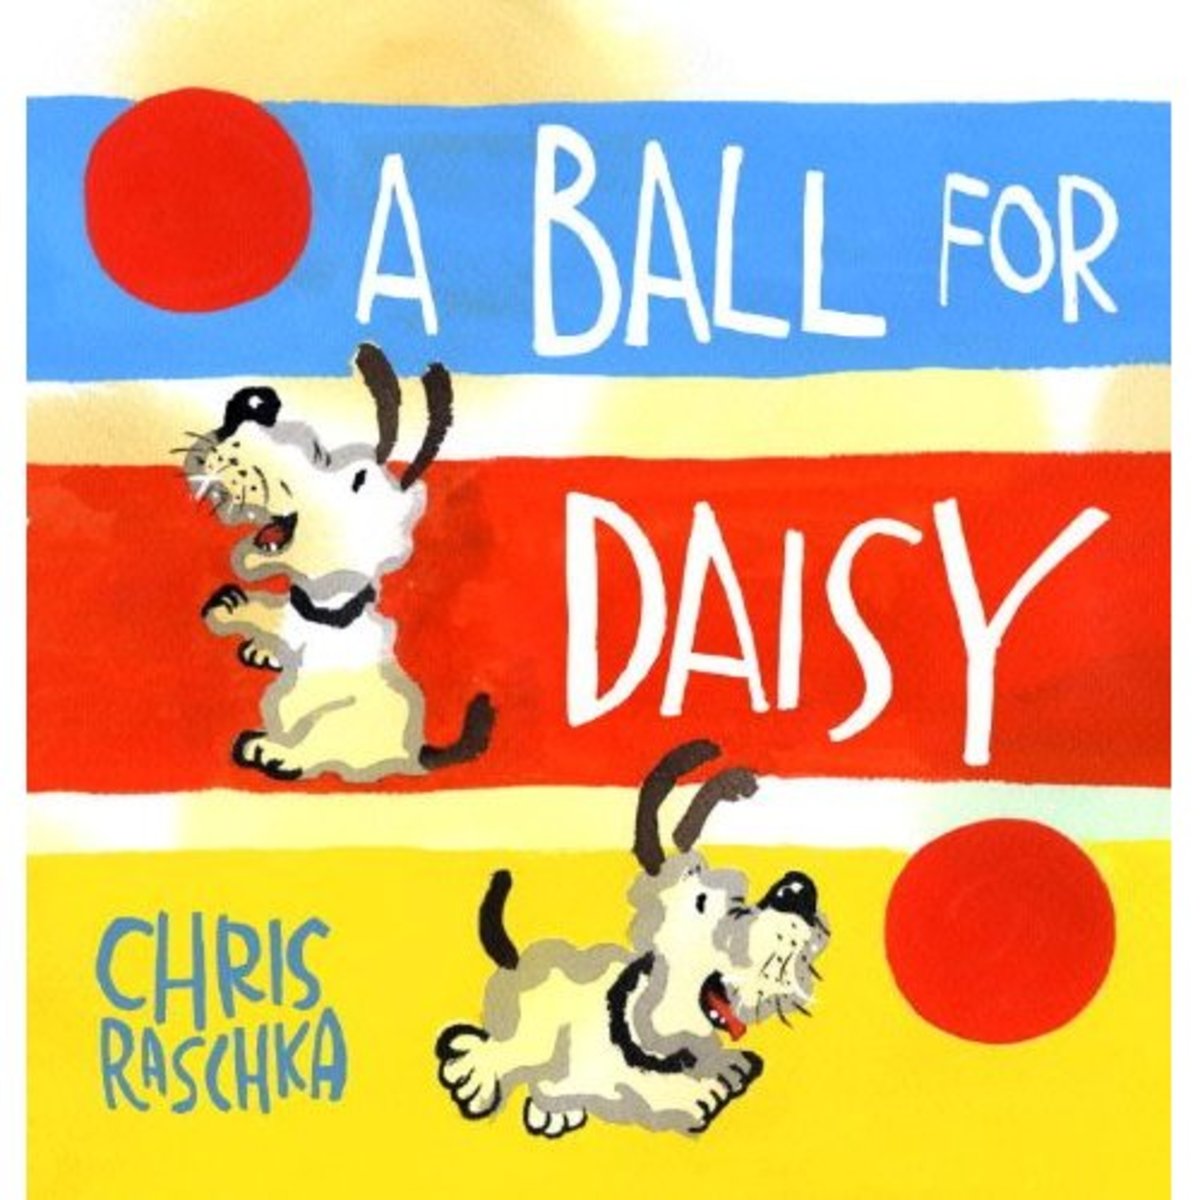 A Ball for Daisy by Chris Raschka is a wordless picture book that won the Caldecott Award in 2012.